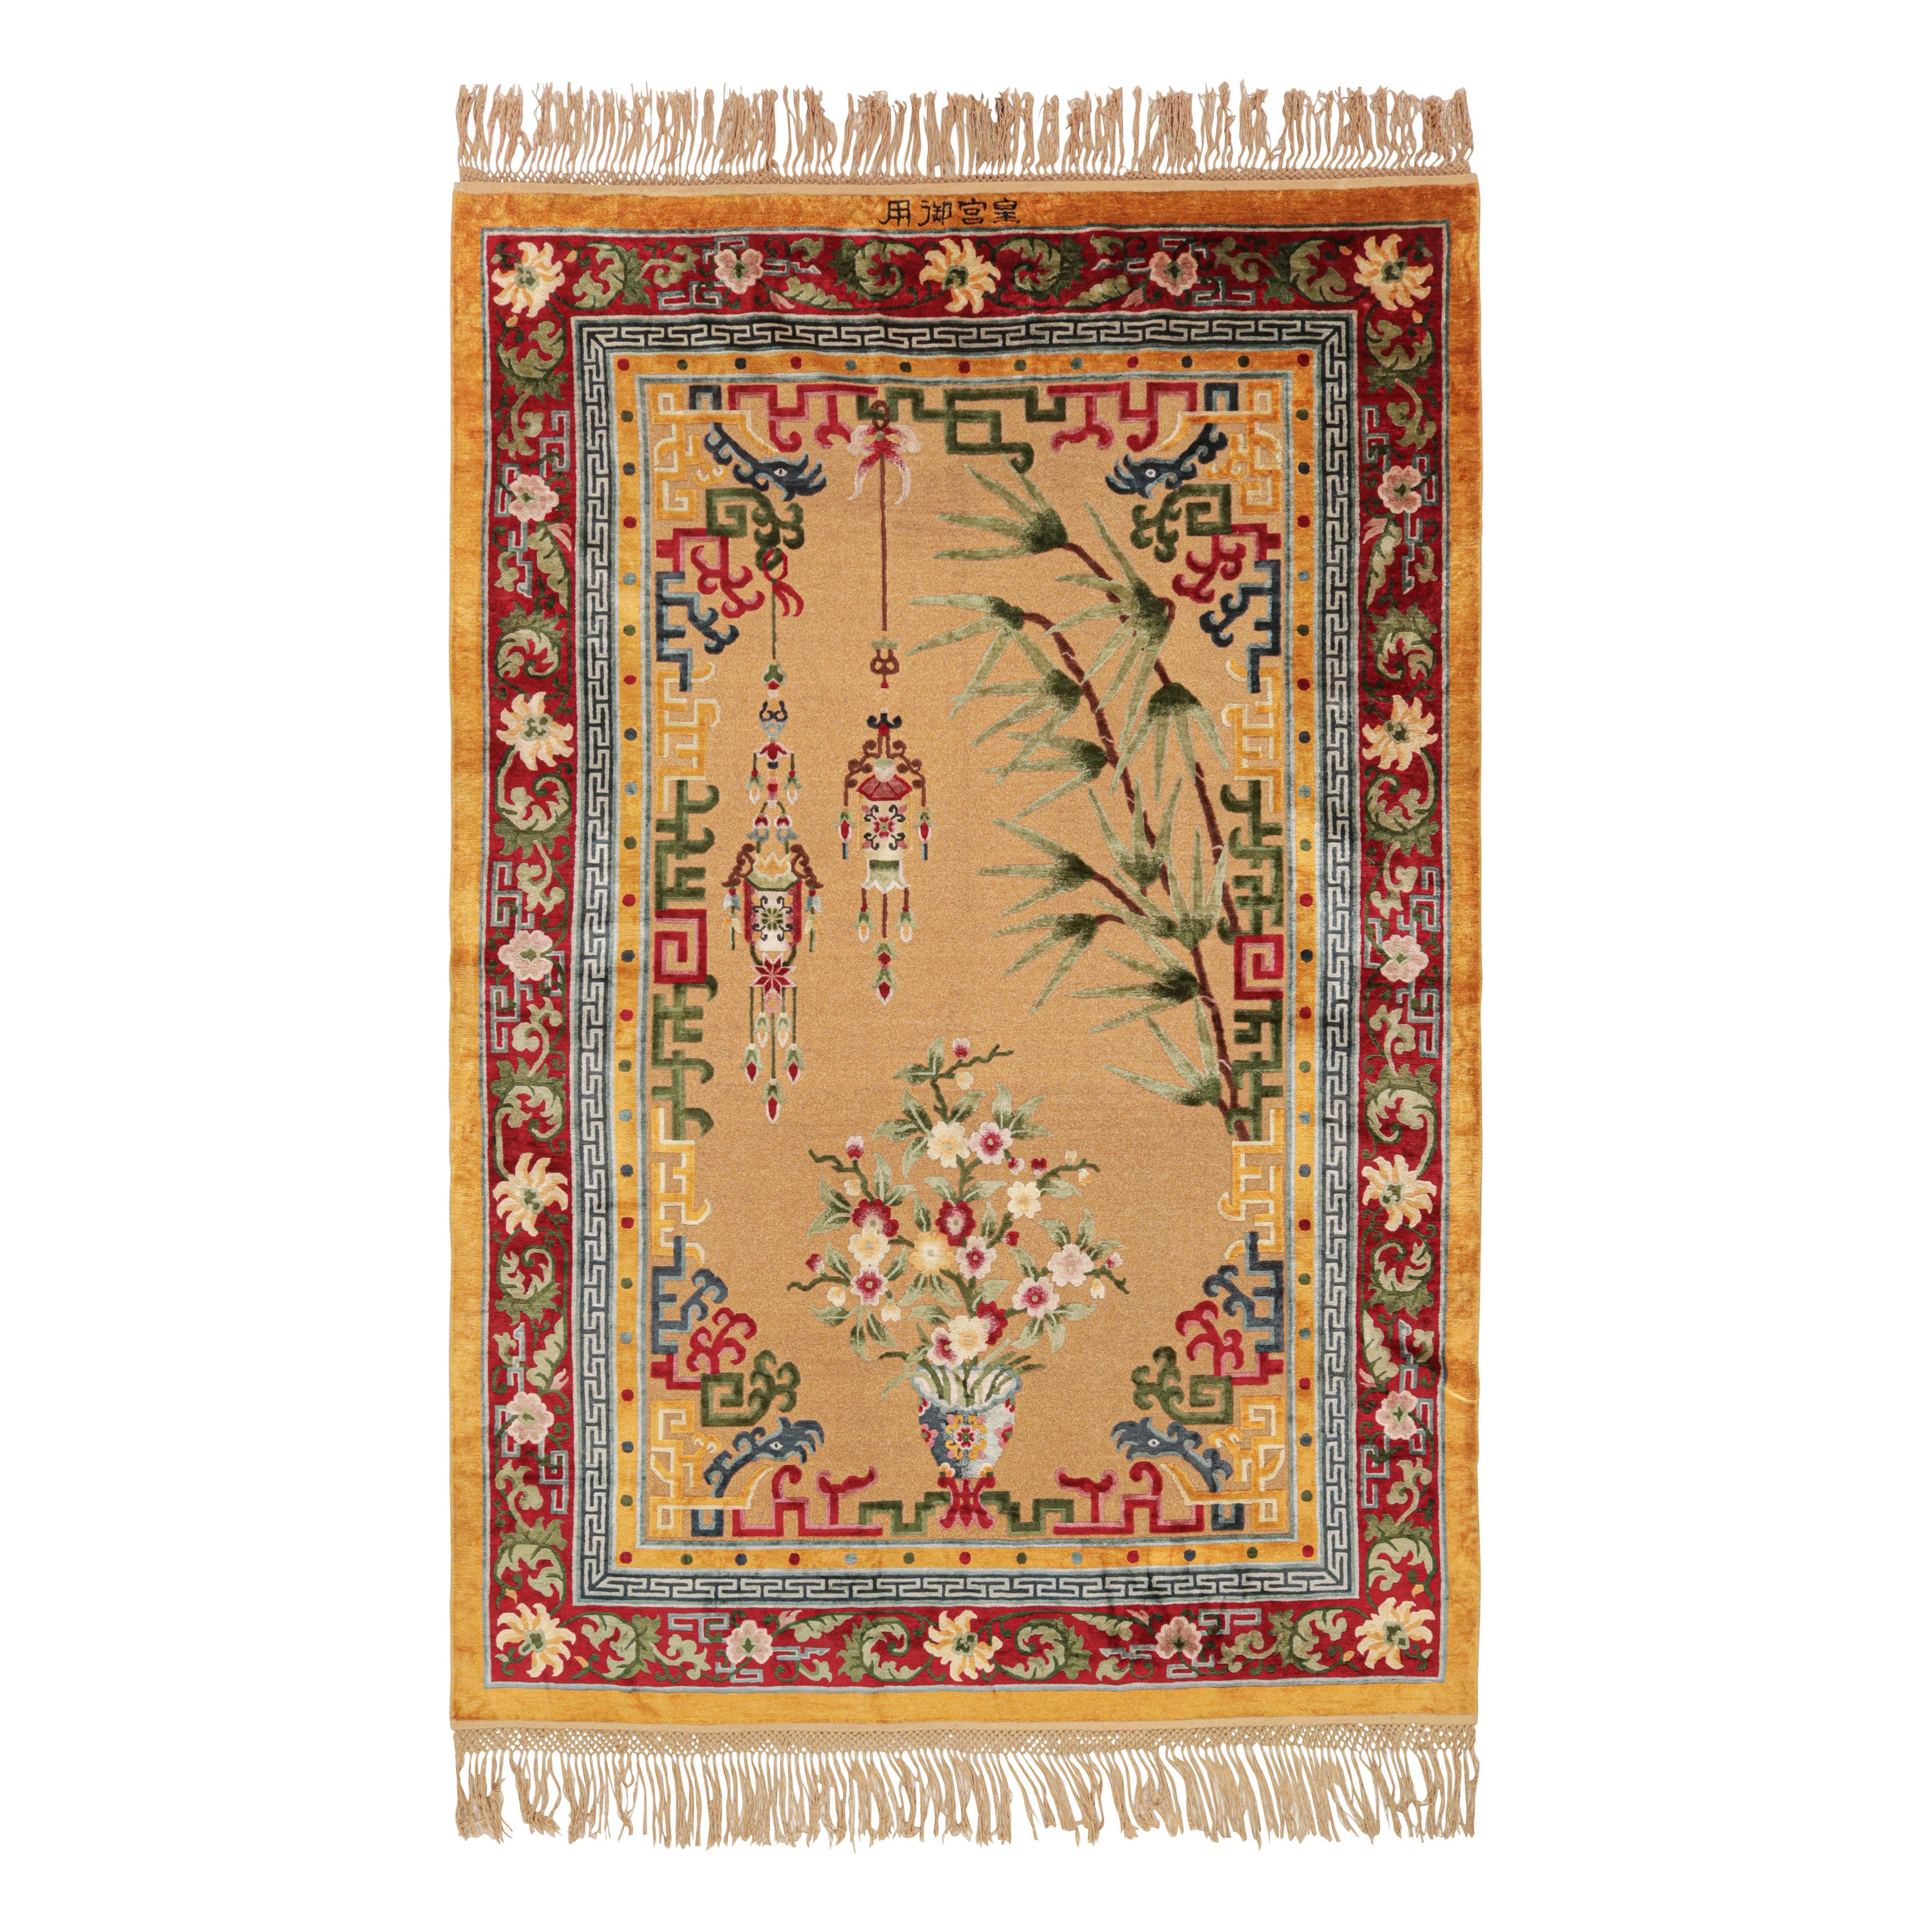 Rug & Kilim’s Chinese Art Deco Style Rug in Gold with Florals and Pictorials